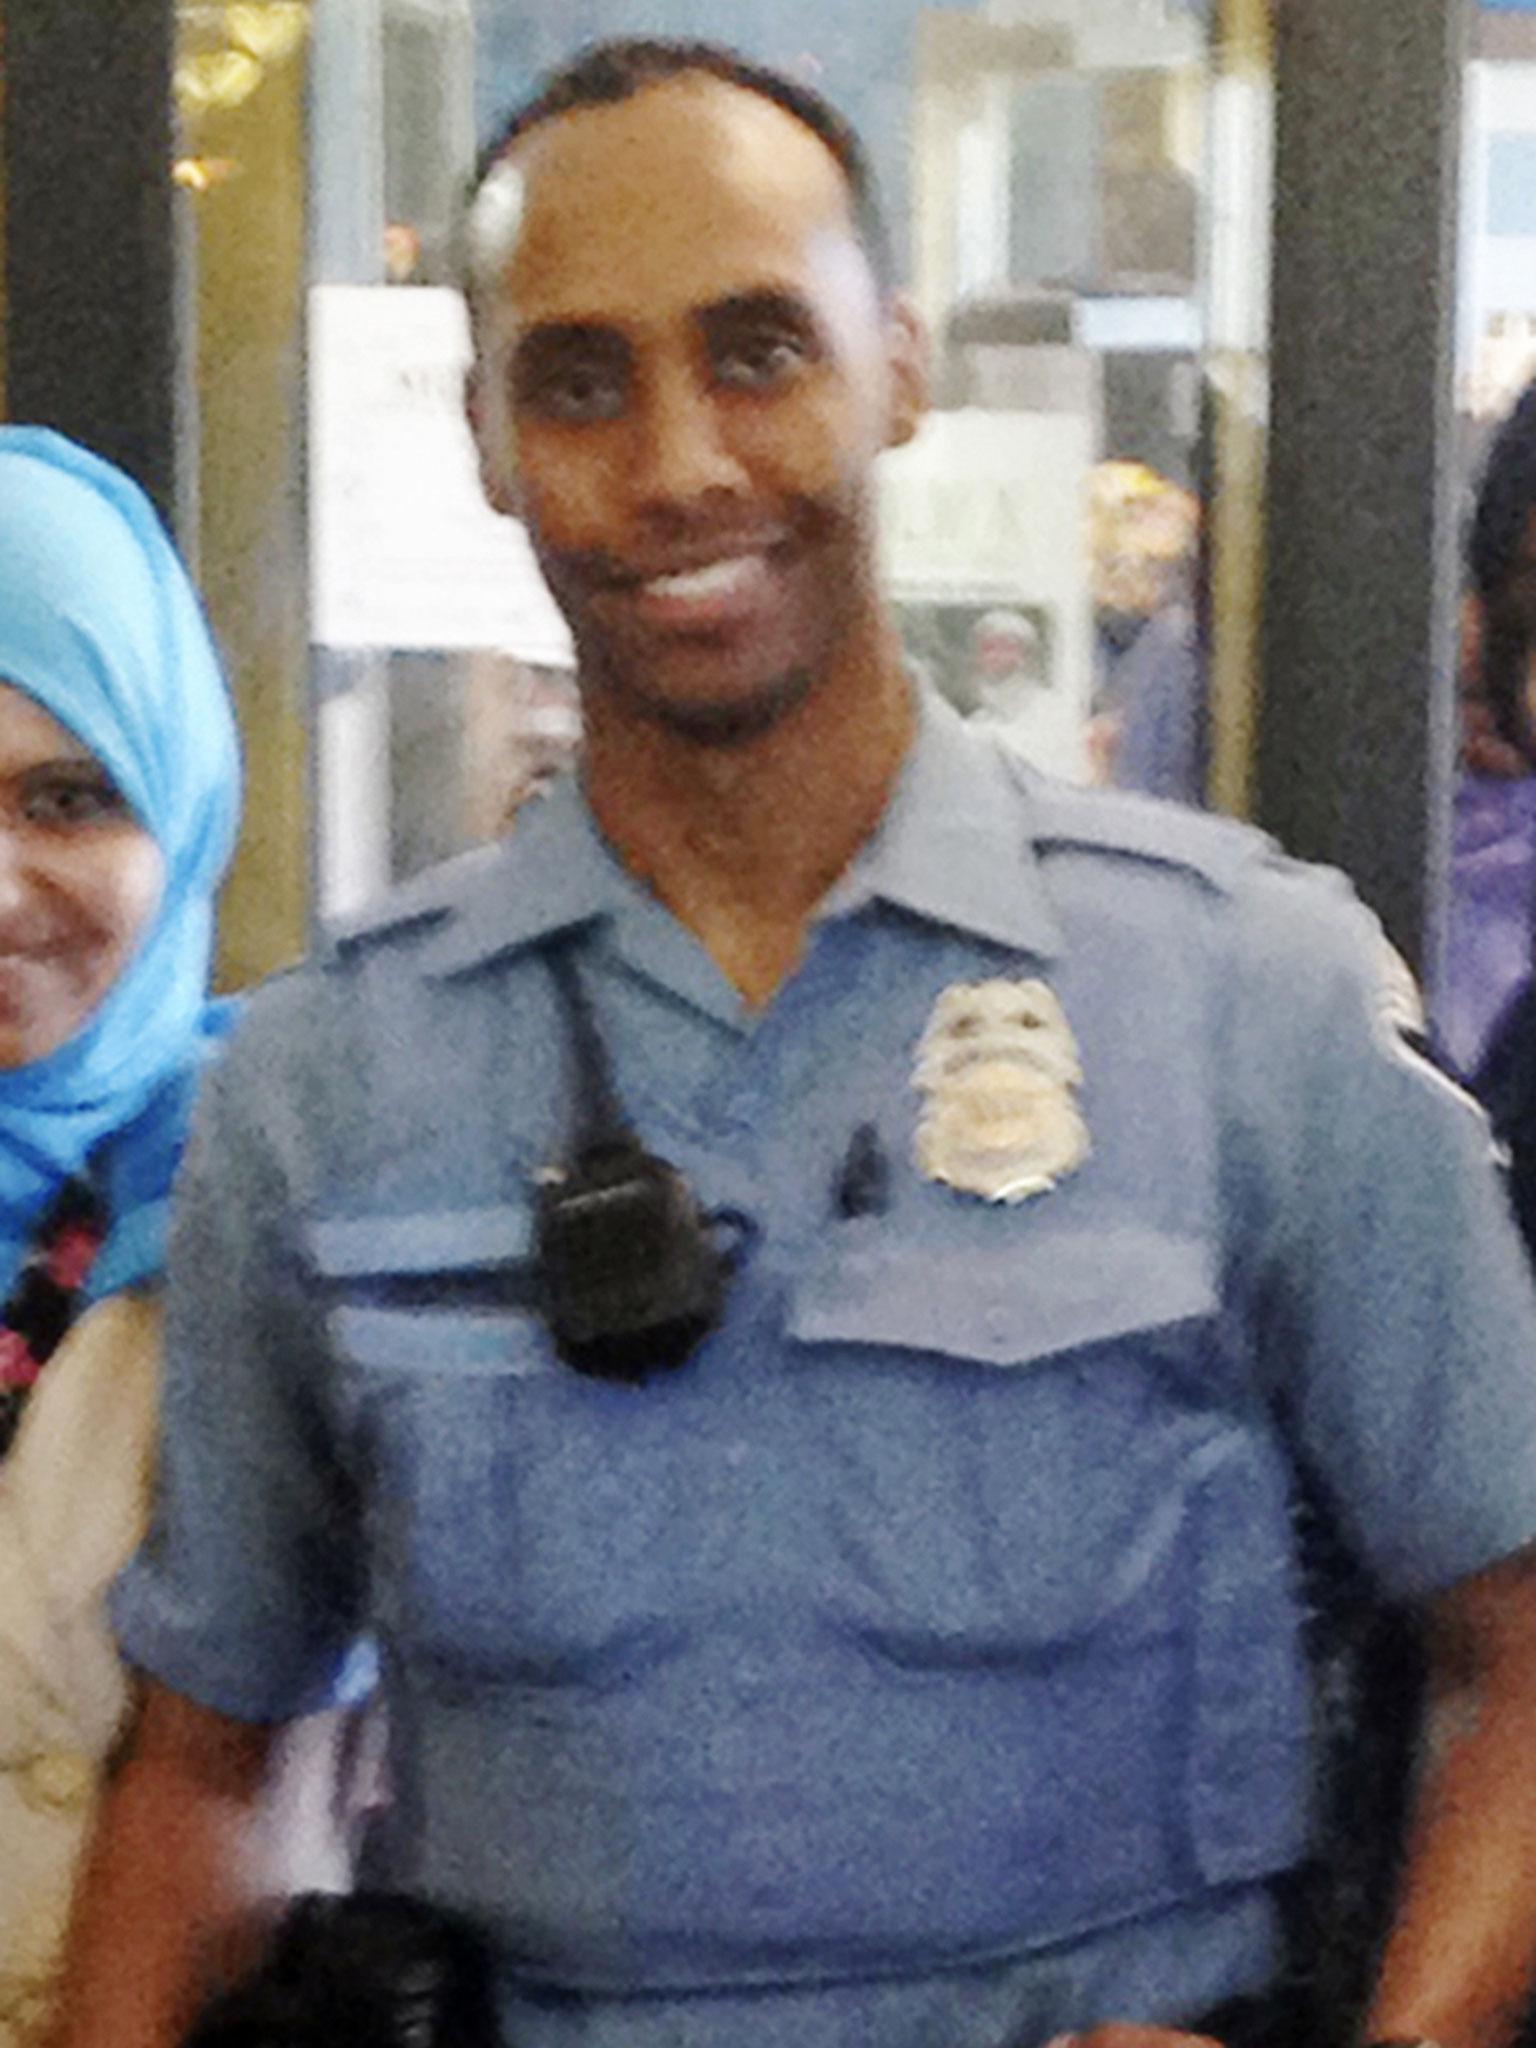 Mohamed Noor, a Somali-American, has been identified by his attorney as the officer who fatally shot Justine Damond